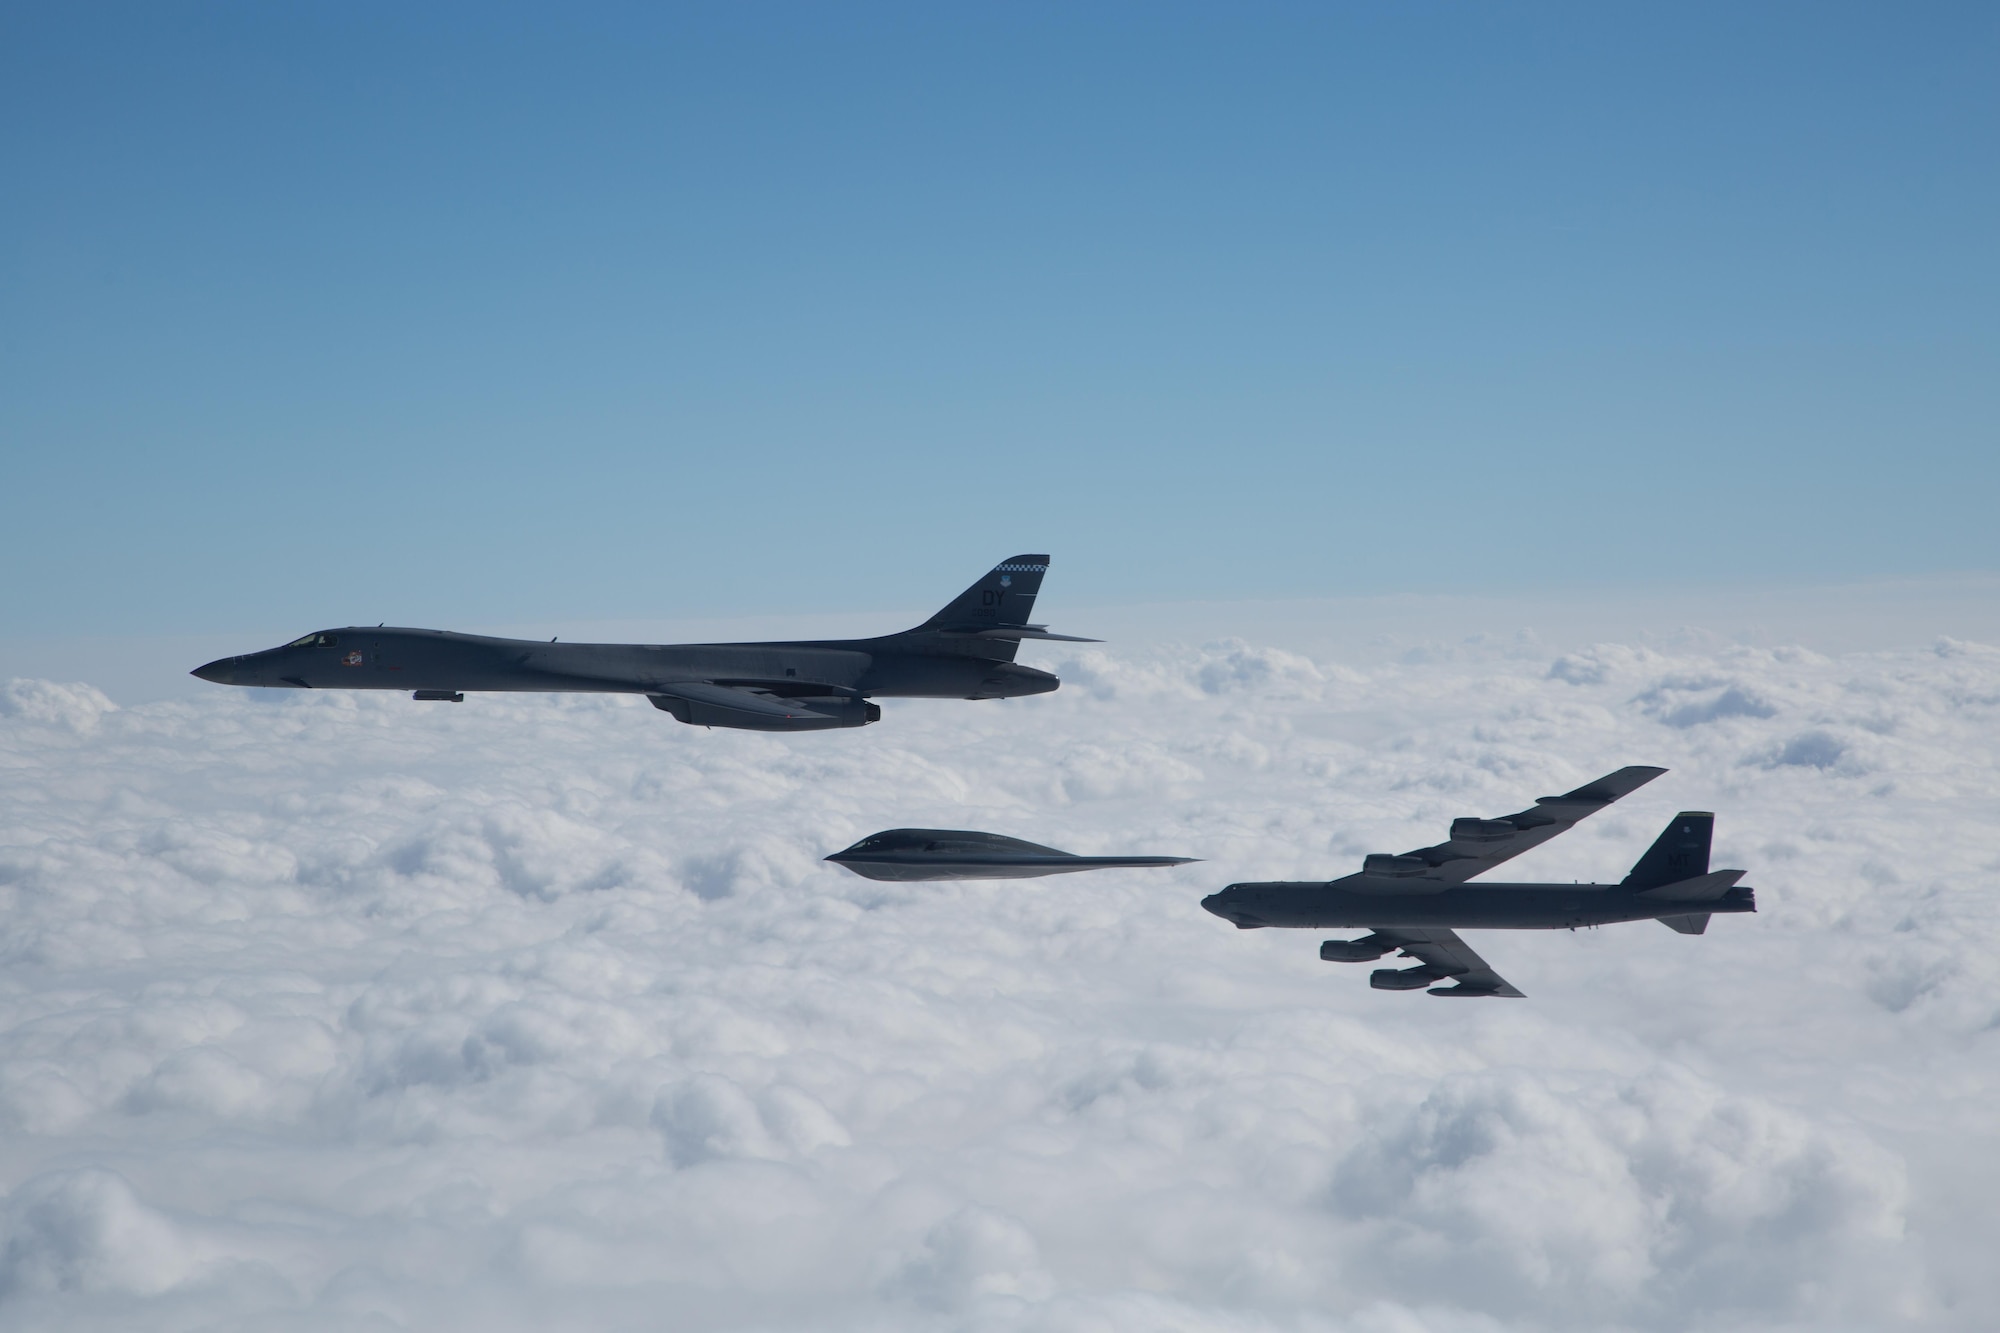 A three-ship bomber formation composed of a B-1B Lancer, B-2 Spirit and B-52 Stratofortress fly near Barksdale Air Force Base, La., Feb. 2, 2017. The bombers participated in an in-trail formation flyover to honor and commemorate the Eighth Air Force’s 75th anniversary. (U.S. Air Force courtesy photo by Sagar Pathak)	